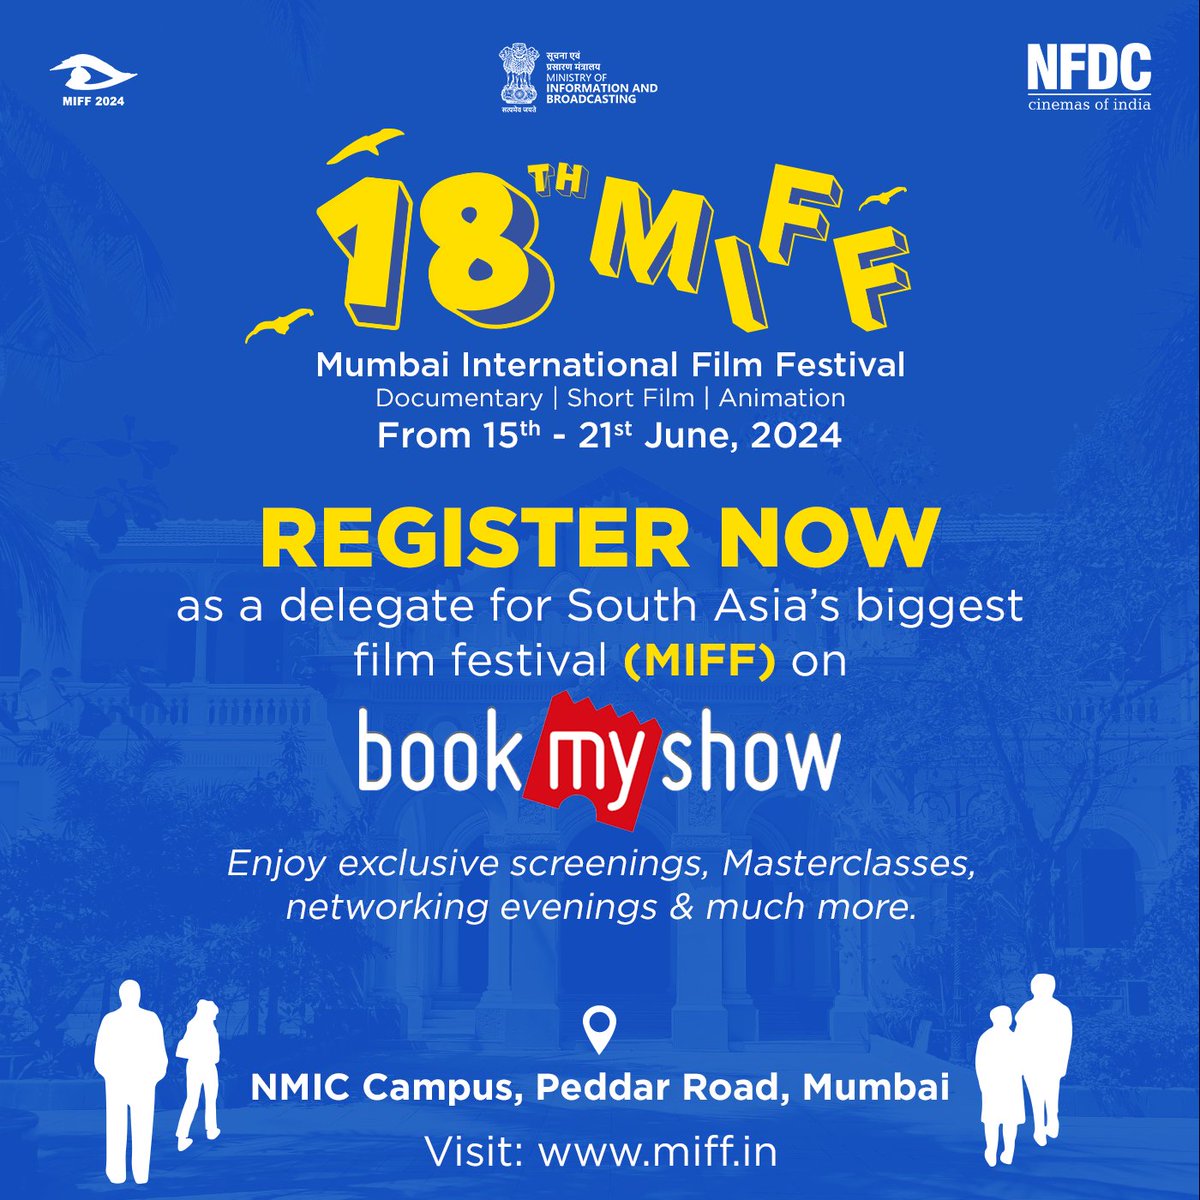 Join South Asia's biggest film festival for Documentary, Animation, and Short Films! Register now as a delegate on @bookmyshow. Enjoy exclusive screenings, masterclasses, networking evenings, and much more. Apply at- in.bookmyshow.com/special/18th-e… #BookMyShow #miff2024